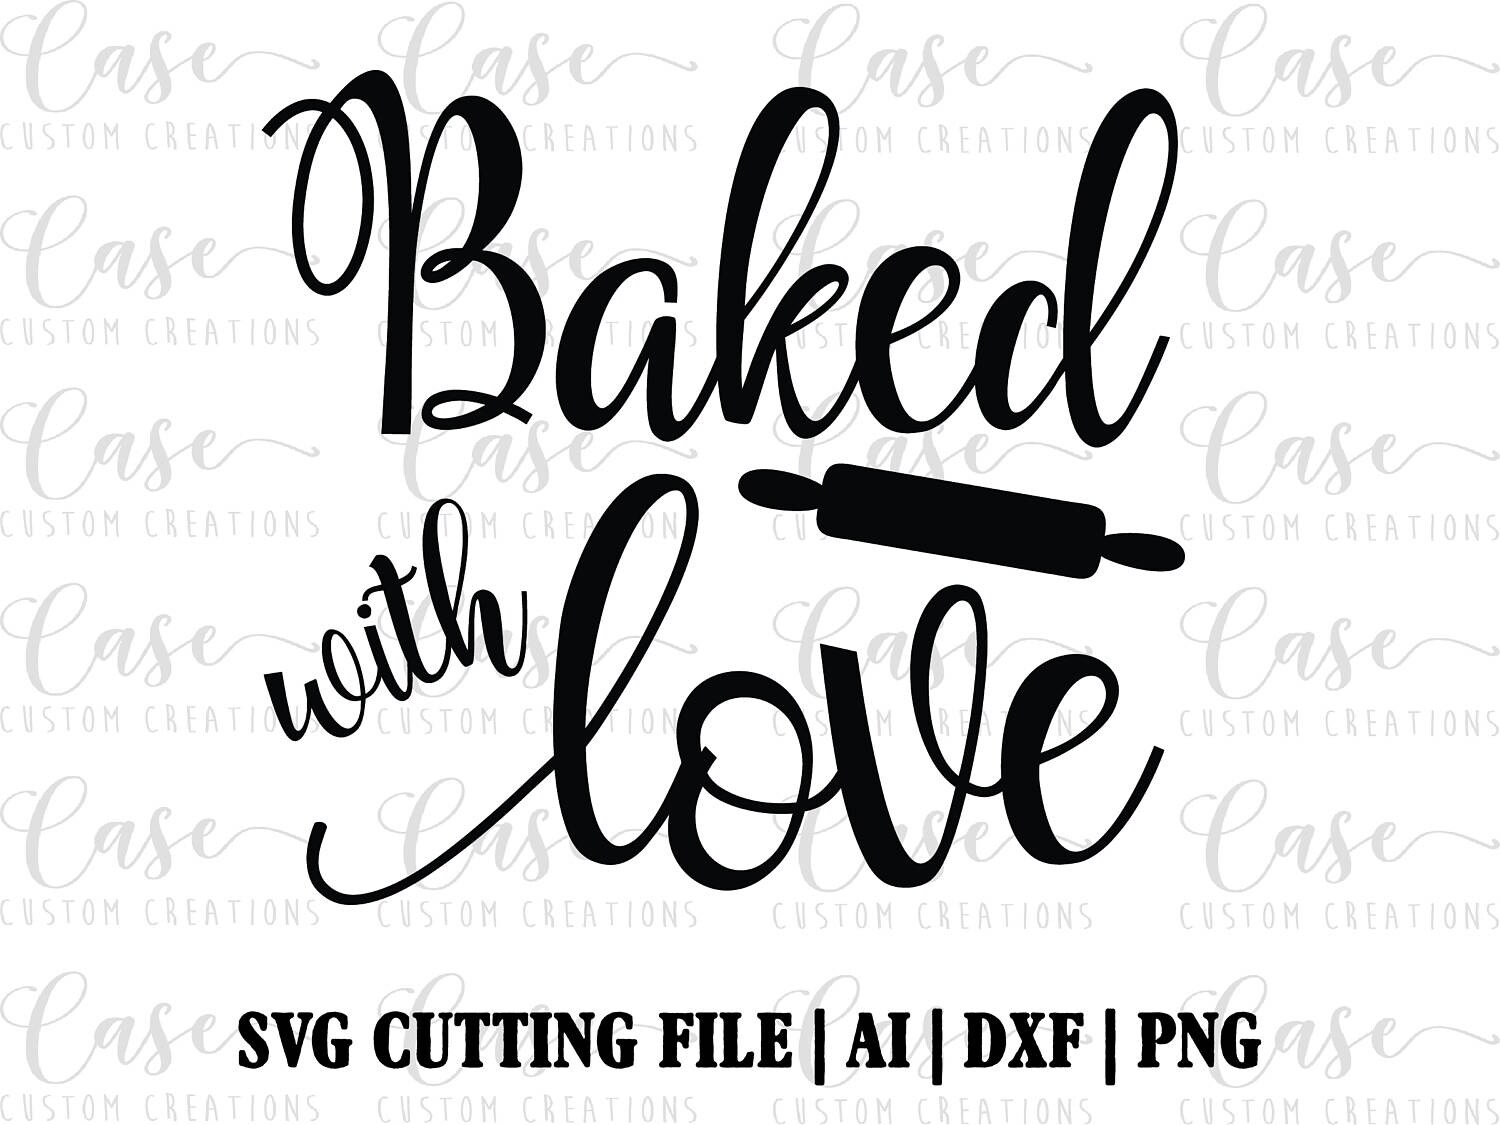 Download Baked with Love SVG Cutting File ai dxf and png Instant